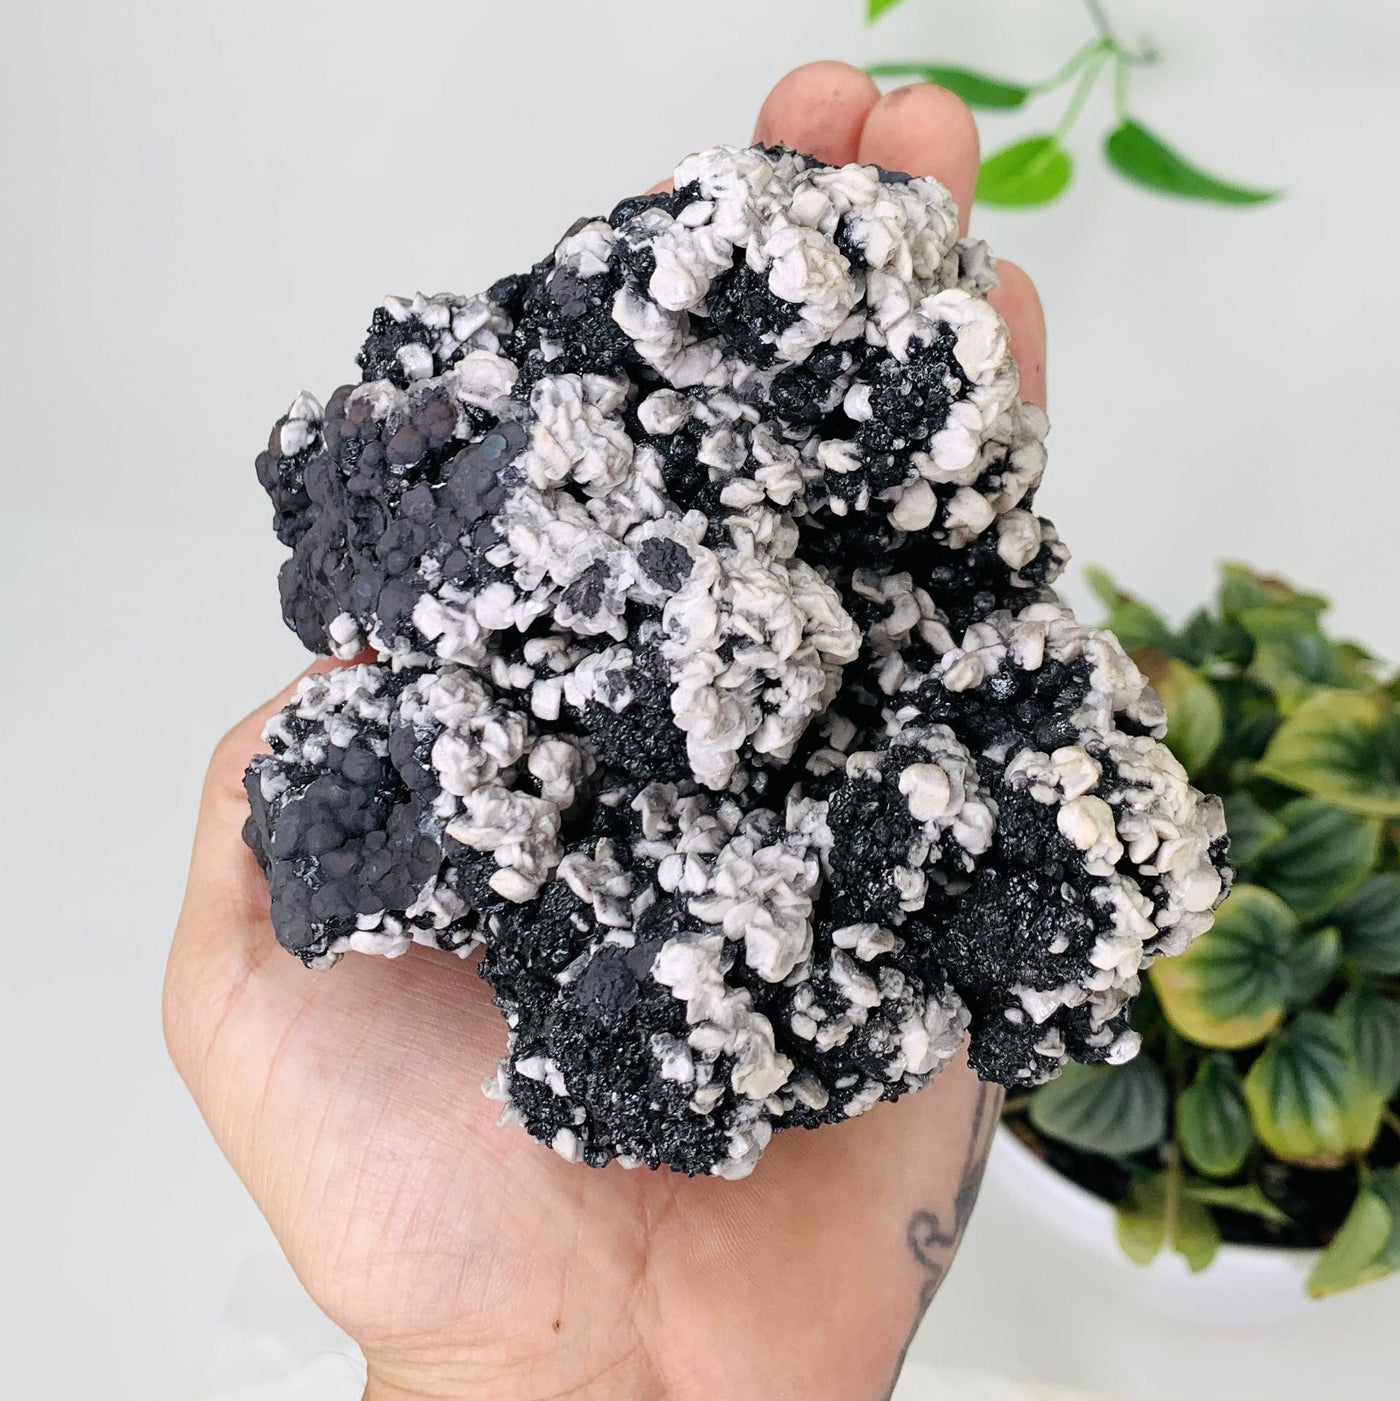 Close up Picture Of the top of goethite cluster, goethite bubbly formations are being focused into. The goethite cluster is also being held for size reference and is being displayed on a white background next to a green natural plant.